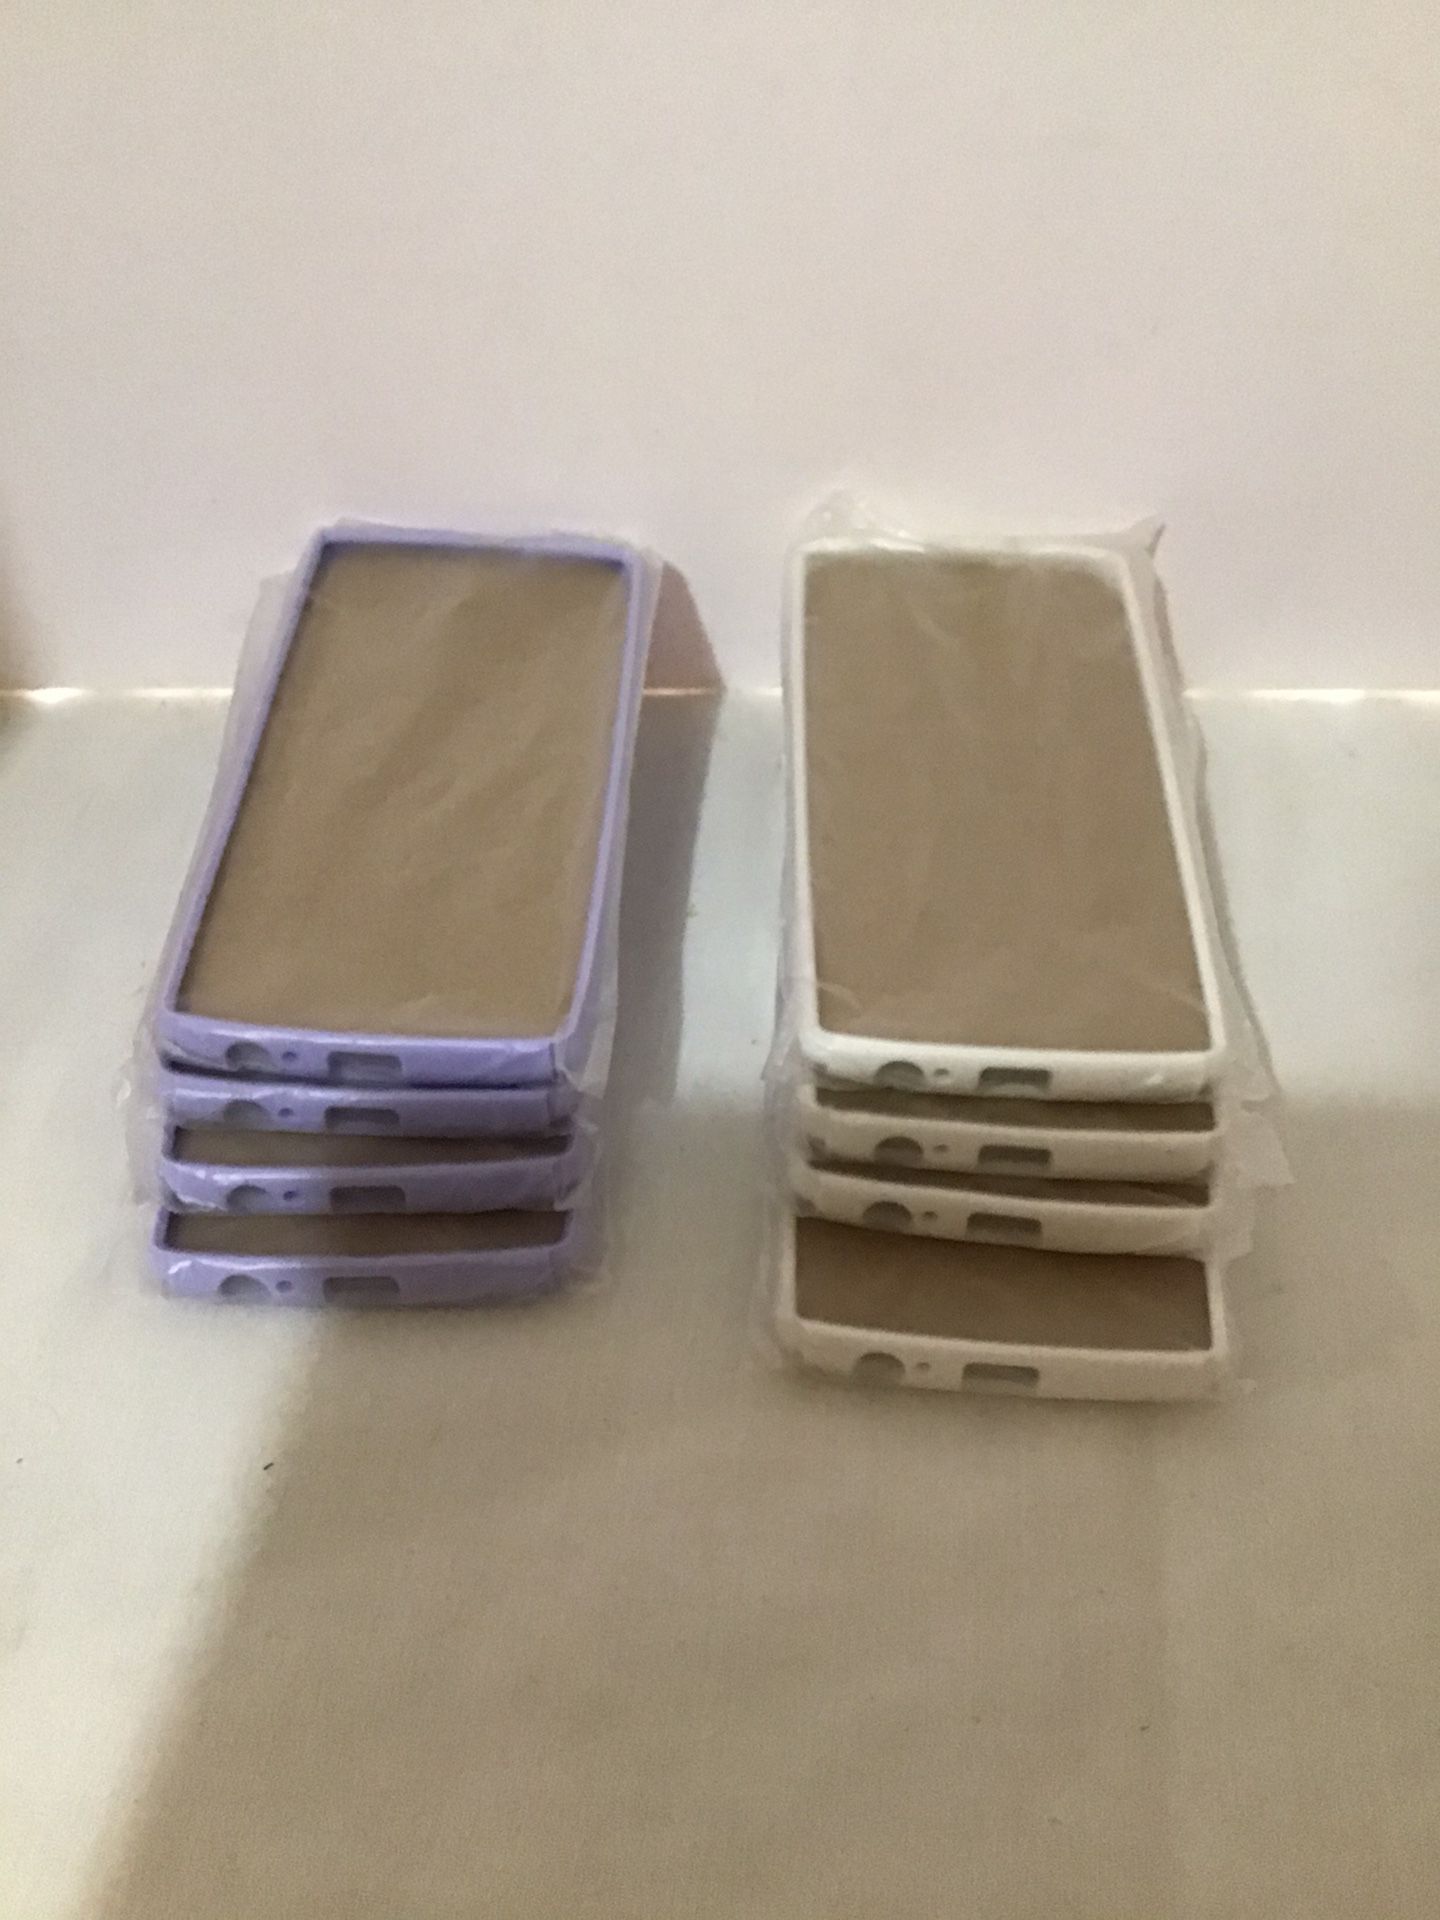 Wholesale Lot of Eight LG G8 Thin Q Cell Phone Covers 4 white & 4 Lavender